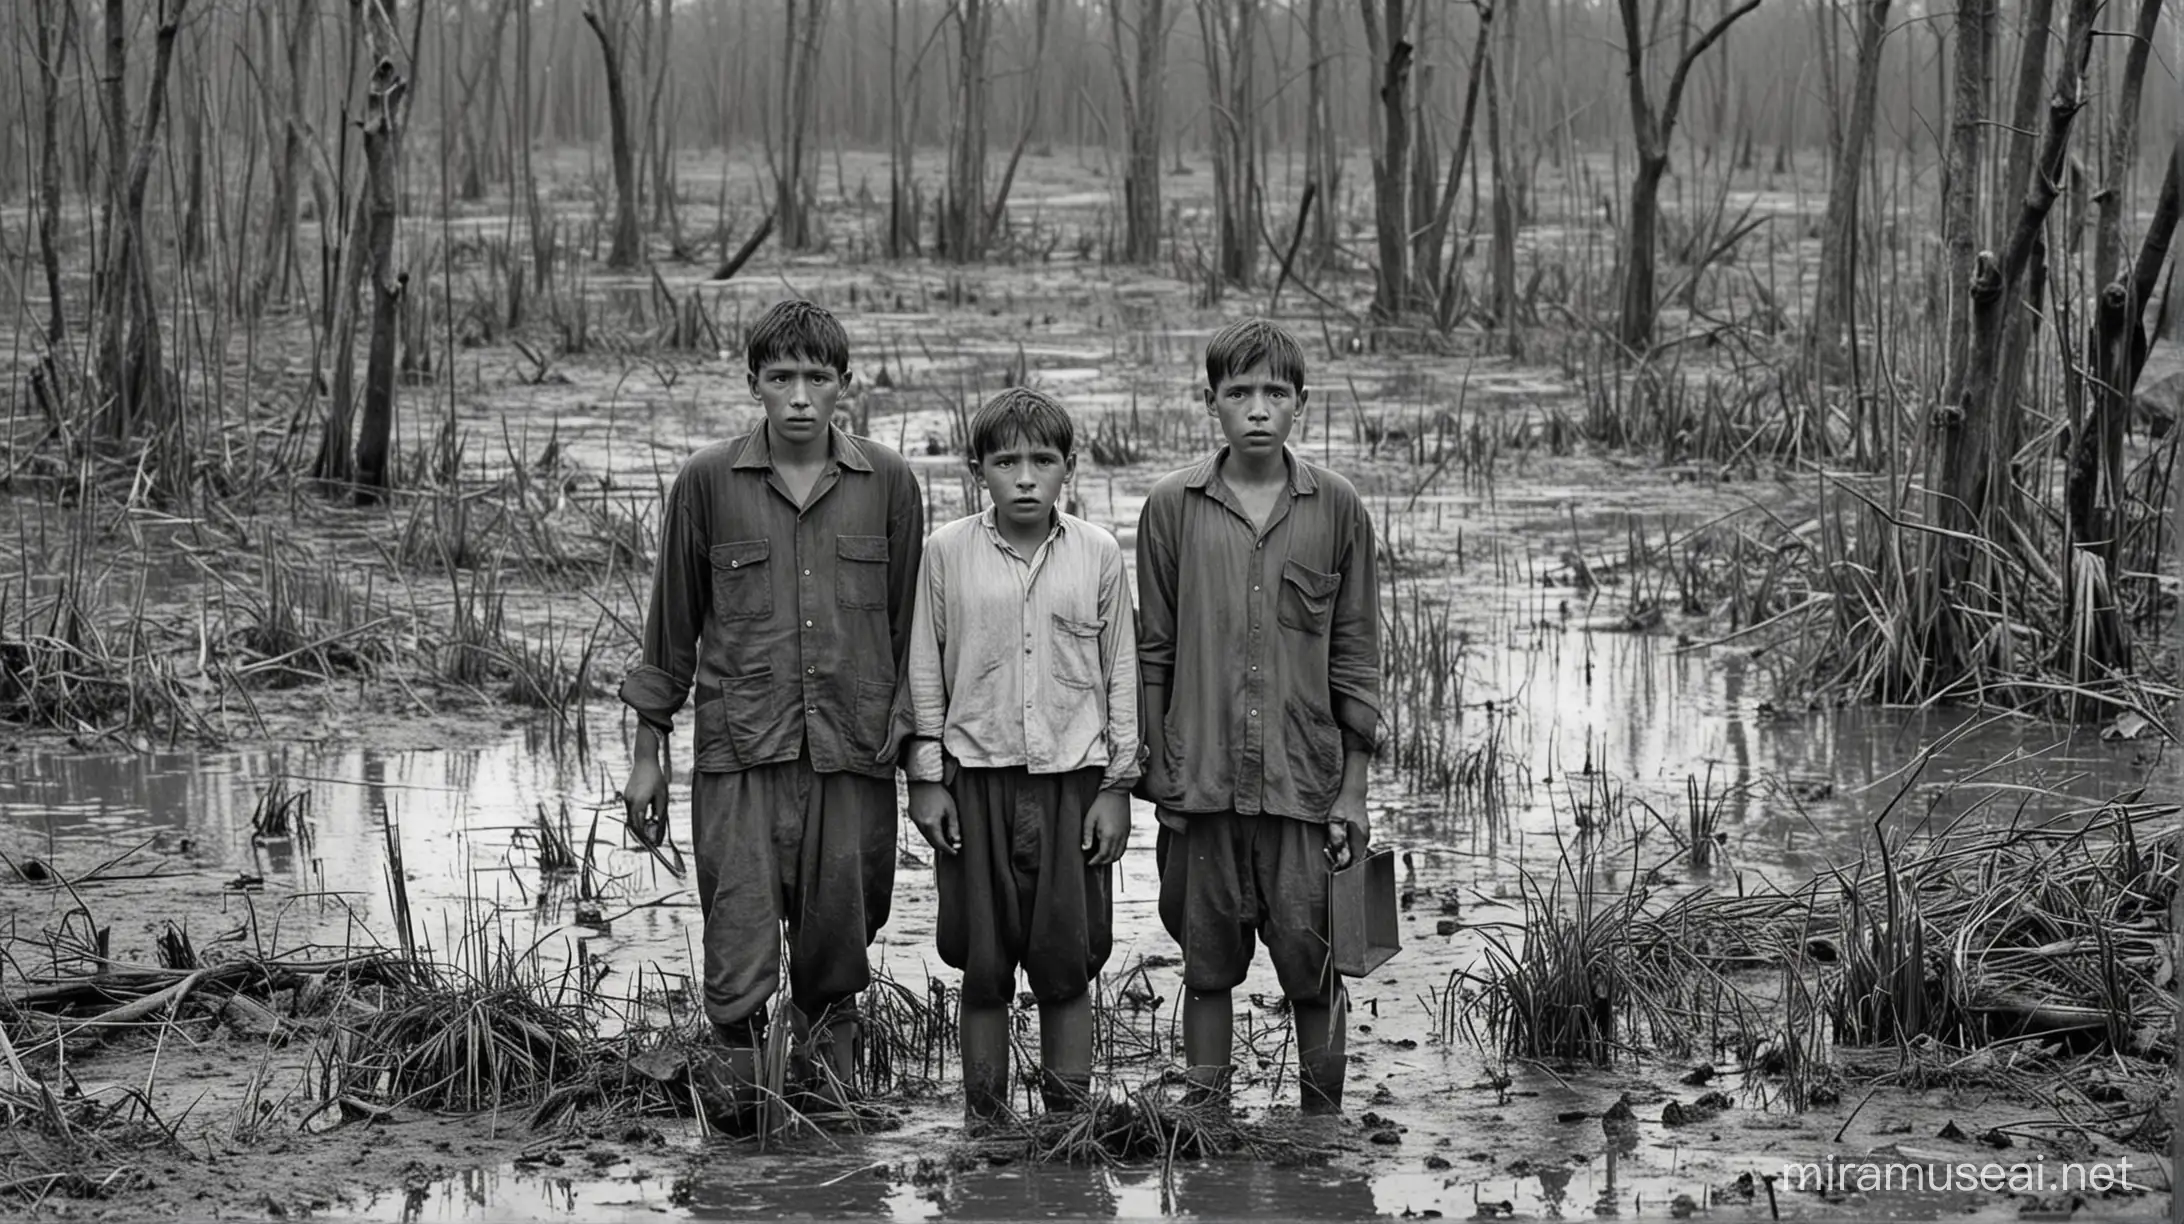 1950 Villagers Gazing Fearfully into the Swamp